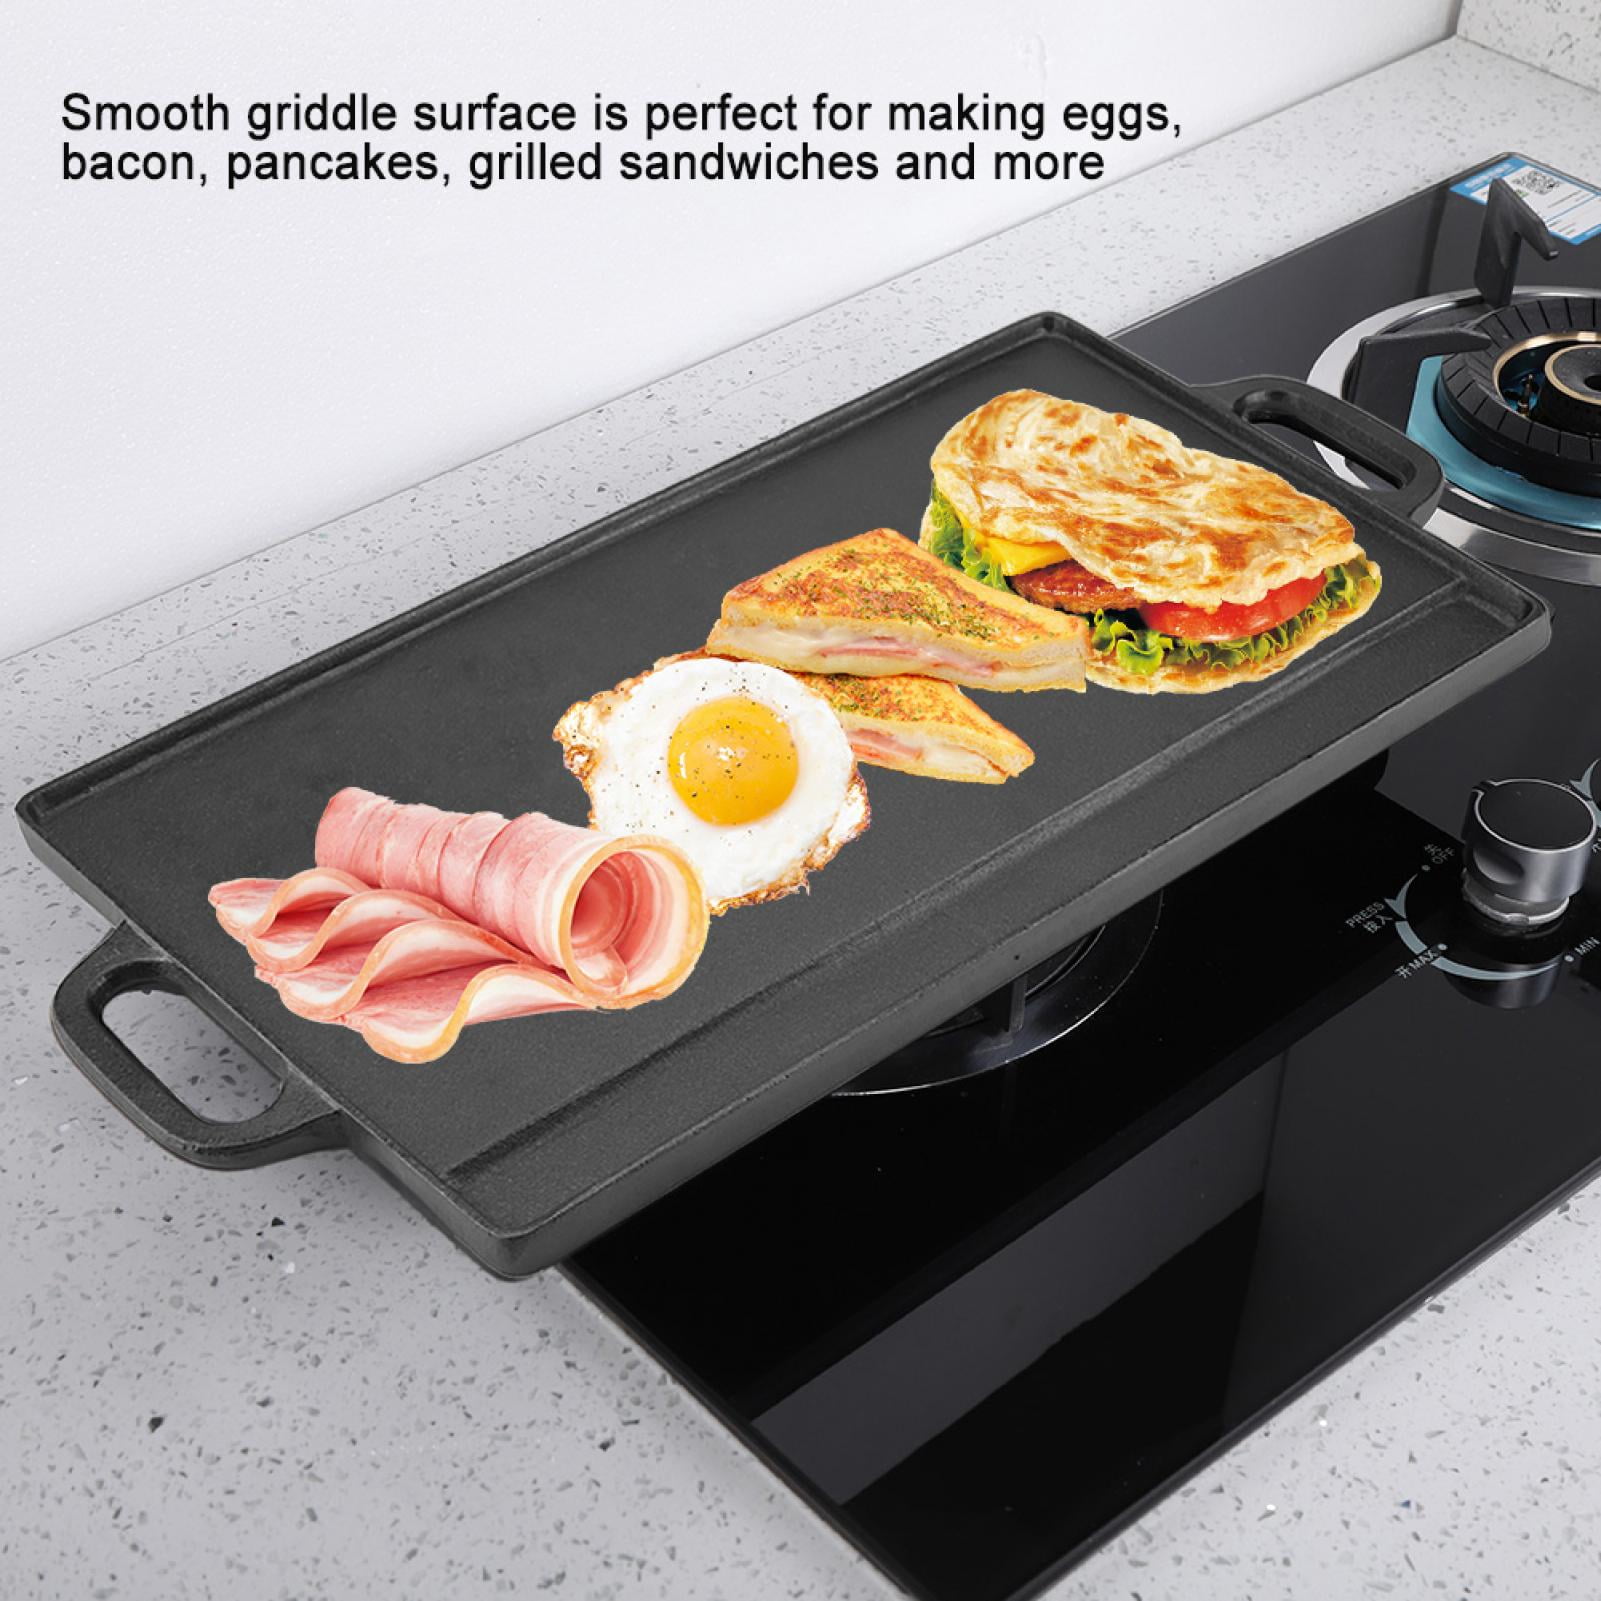  Stove Top Flat Griddle,2 Burner Griddle Grill Pan for Glass  Stove Top Grill,Aluminum Pancake Griddle,Non-Stick Top Griddle for Gas  Grill, Double Burner Griddle For Camping/Indoor: Home & Kitchen